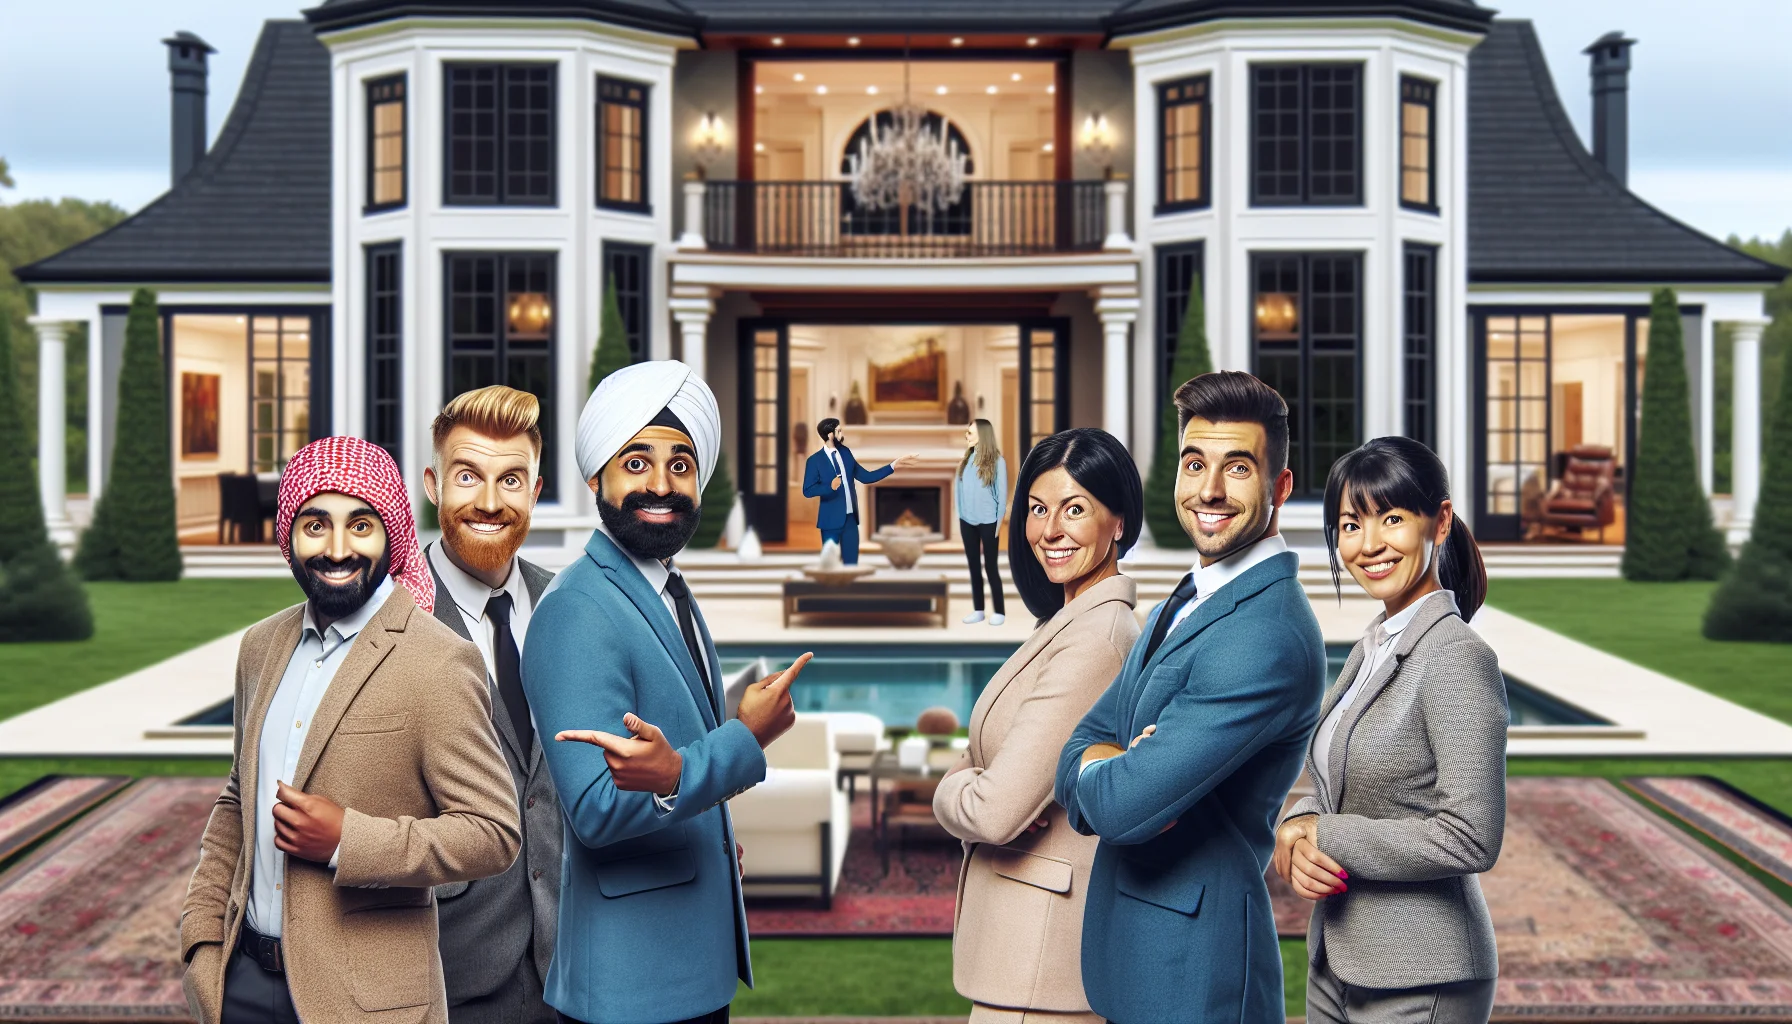 Design a humorous and realistic image that displays a group of real estate agents participating in an ideal real estate scenario. Picture them in an open house environment with a luxurious, flawlessly staged home behind them. This group of agents should be diverse - including a Middle Eastern woman, a Caucasian man, a South Asian man, and a Black woman. They are all smiling and pointing out the refined architectural features of the property, while potential buyers from various ethnic backgrounds browse the pristine rooms and admirable landscape.